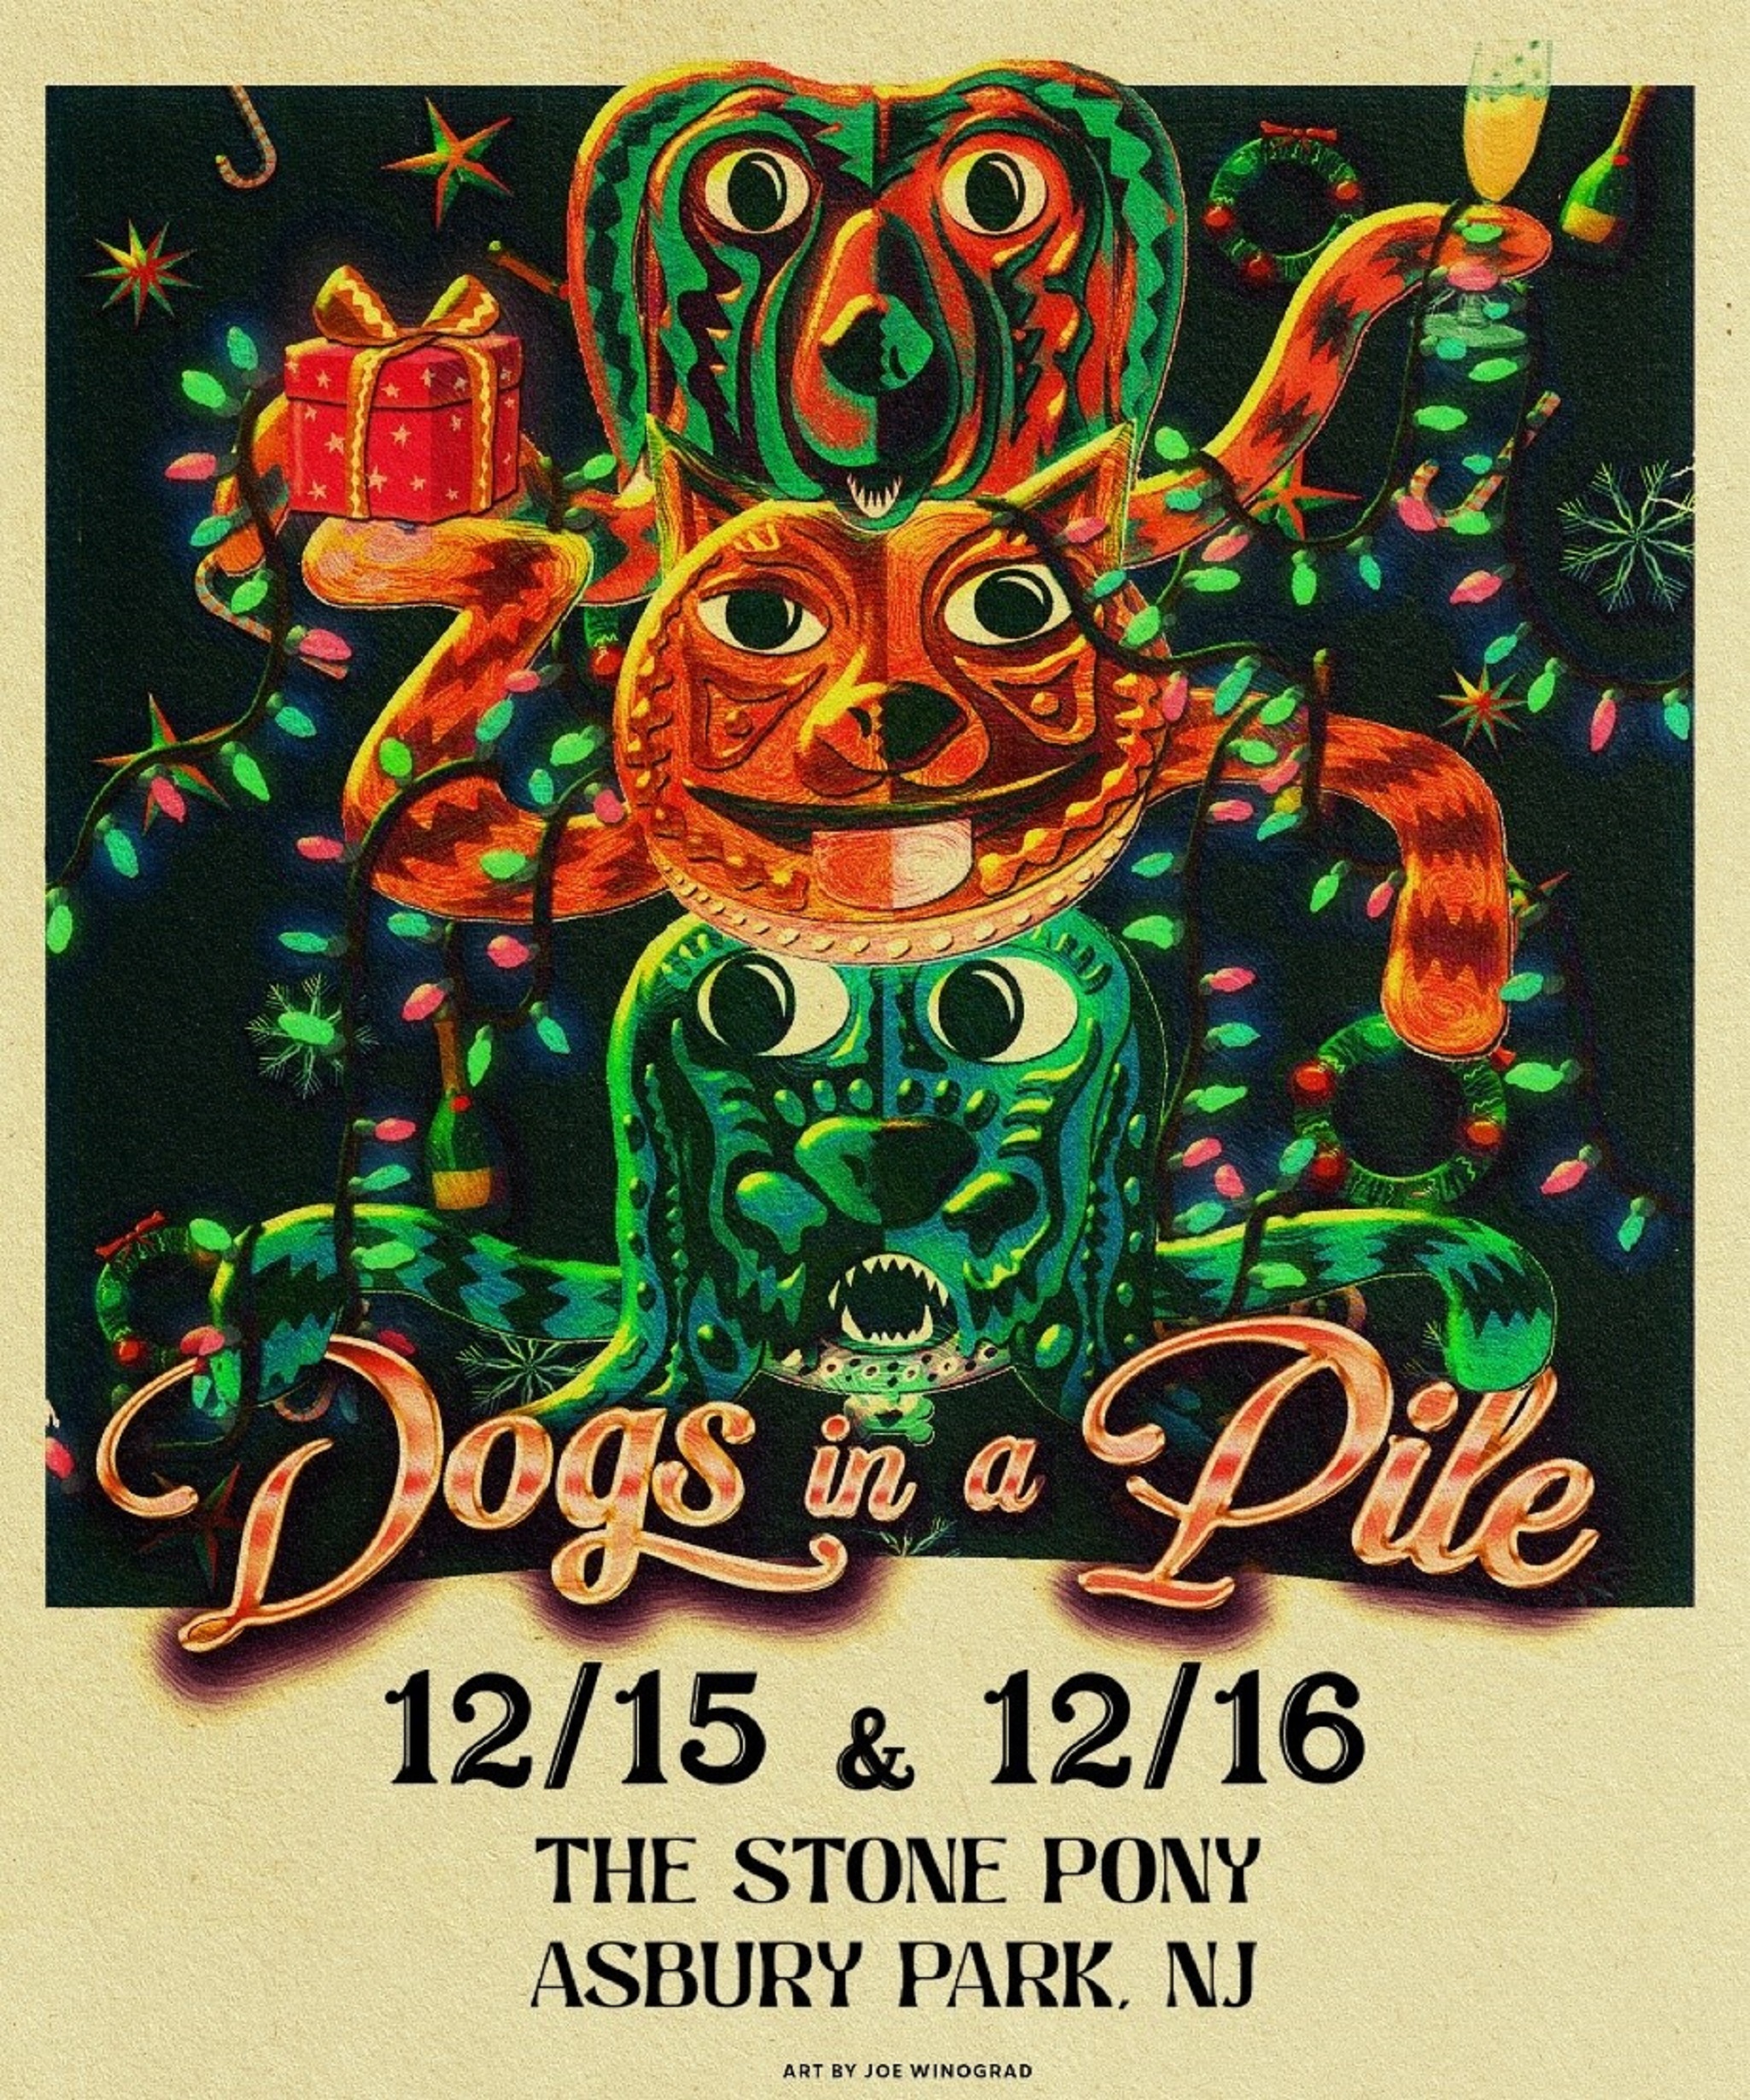 DOGS IN A PILE SET TO PLAY LEGENDARY ASBURY PARK VENUE, THE STONE PONY, ON DEC. 15-16